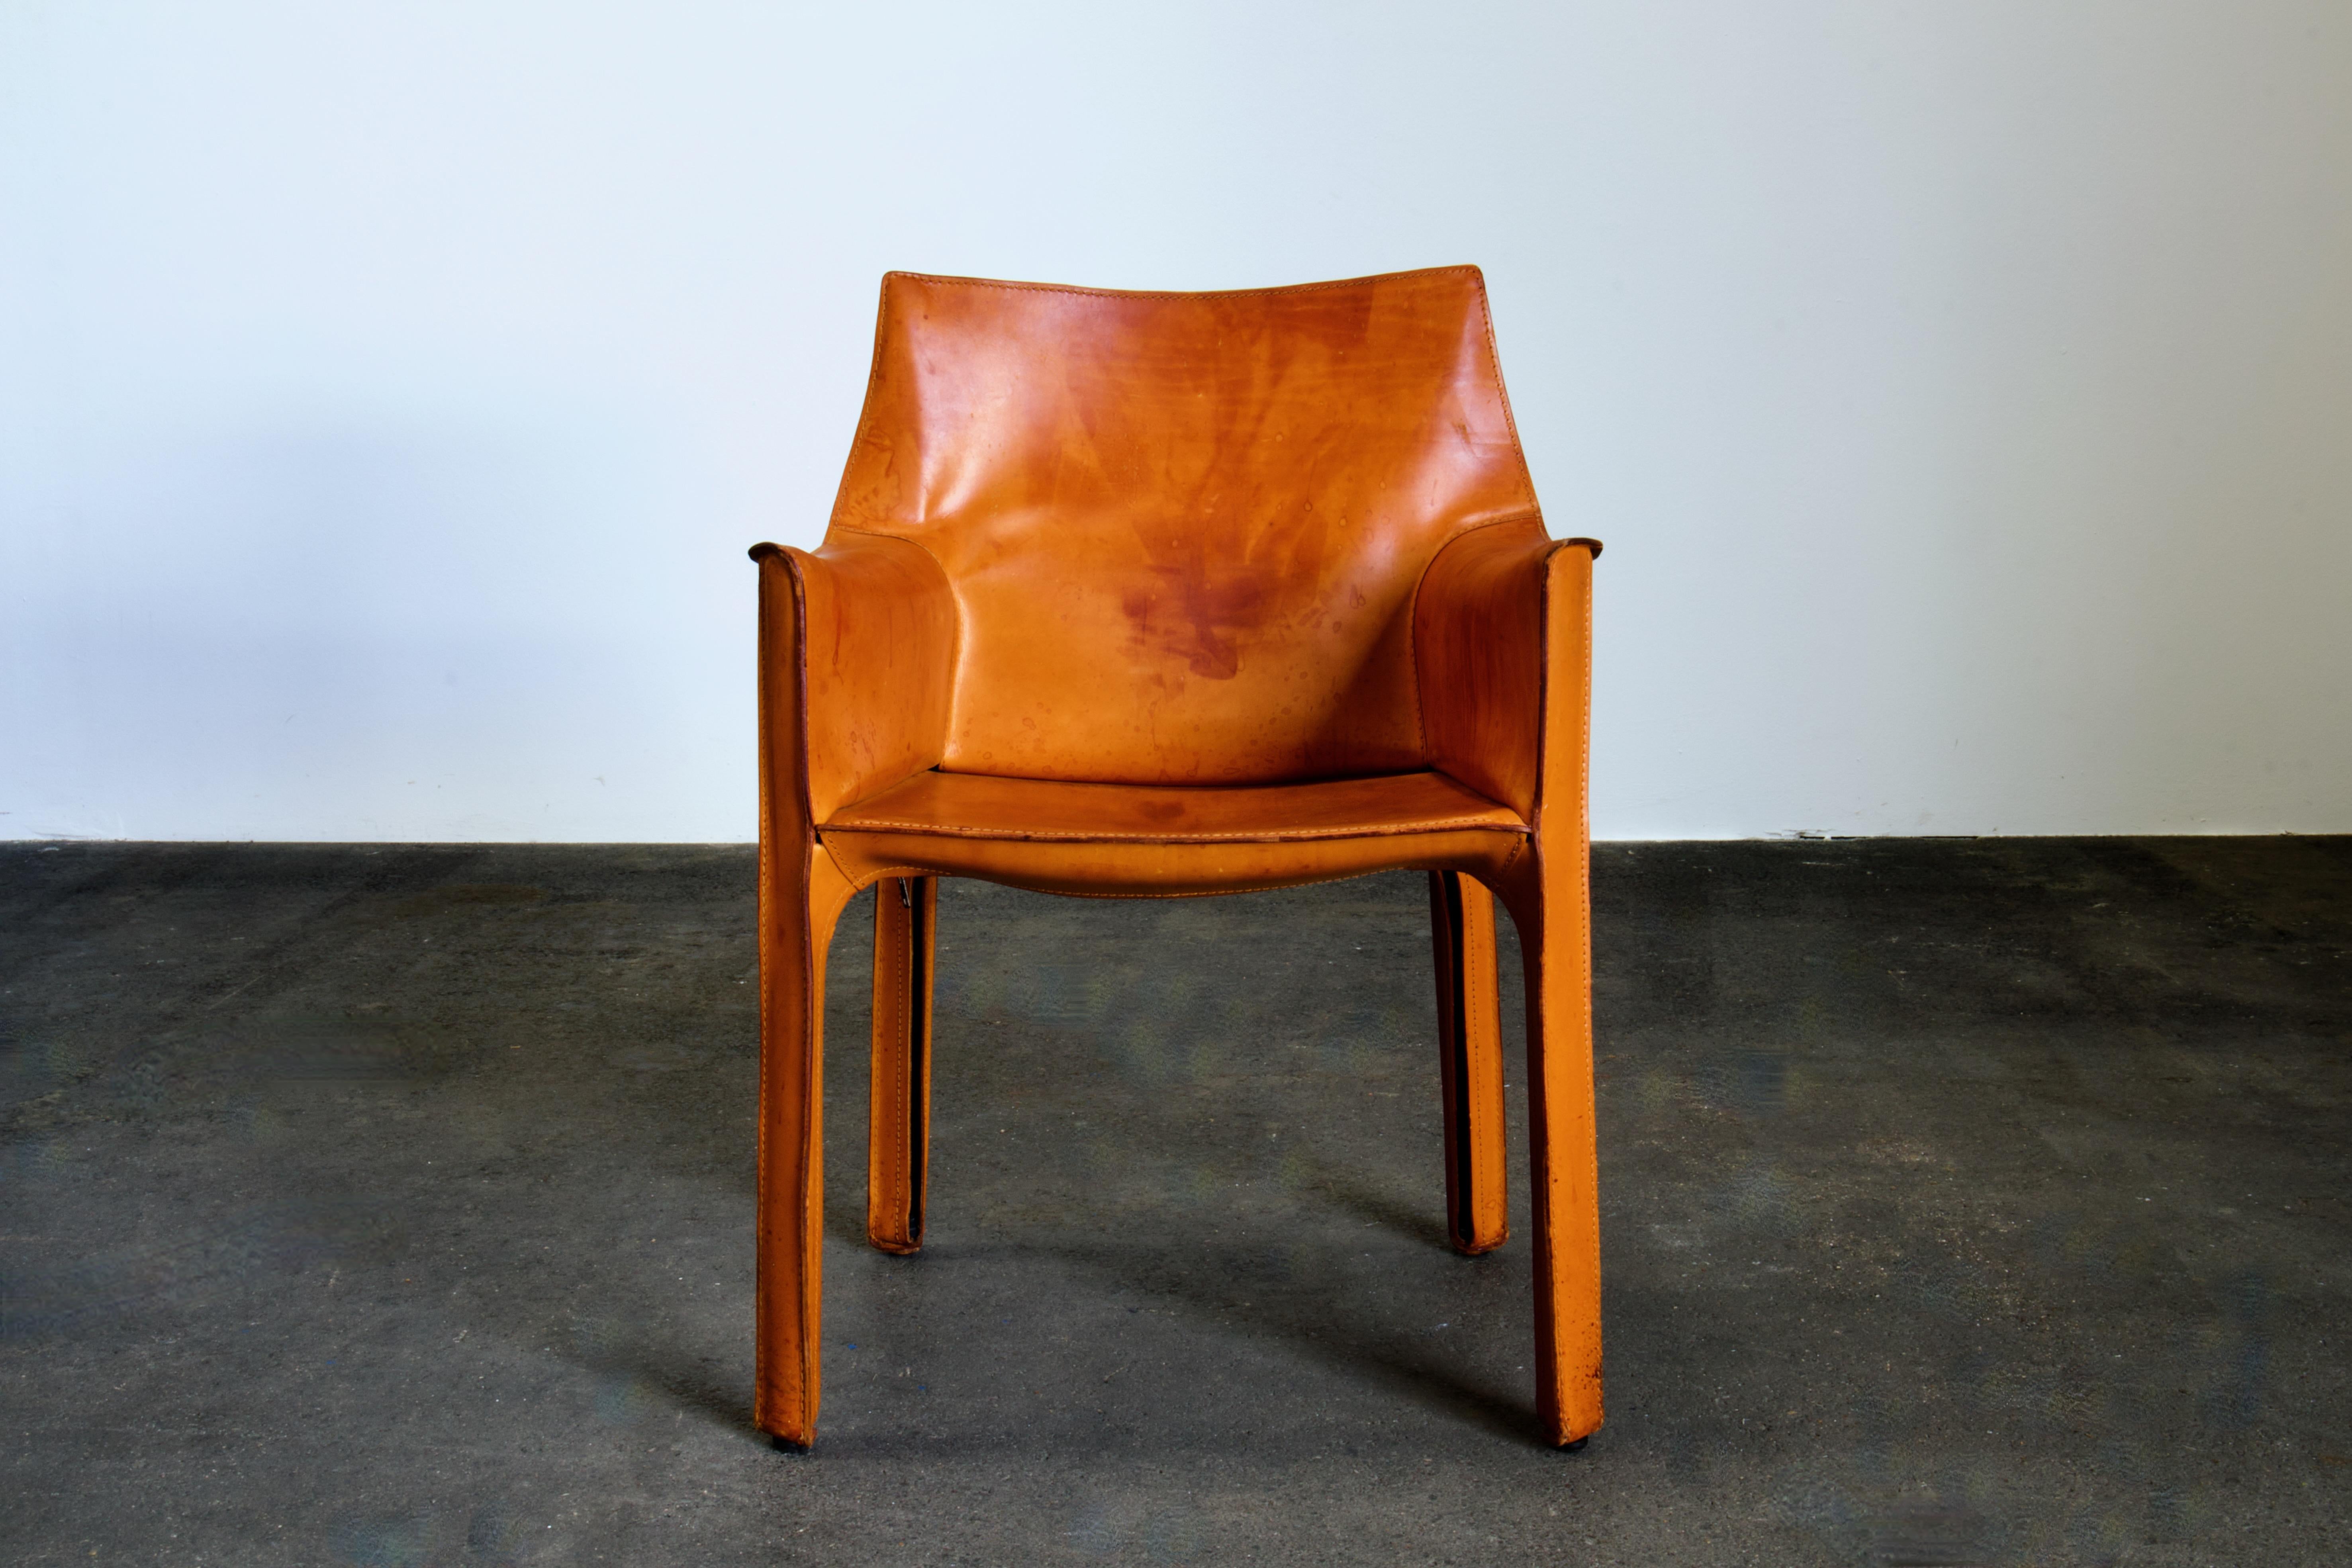 Exquisite original Mario Bellini CAB 413 chairs, a true emblem of timeless design. Manufactured by the renowned Italian design house, Cassina, in the 1970s, these chairs represent a perfect amalgamation of form and function.

Key